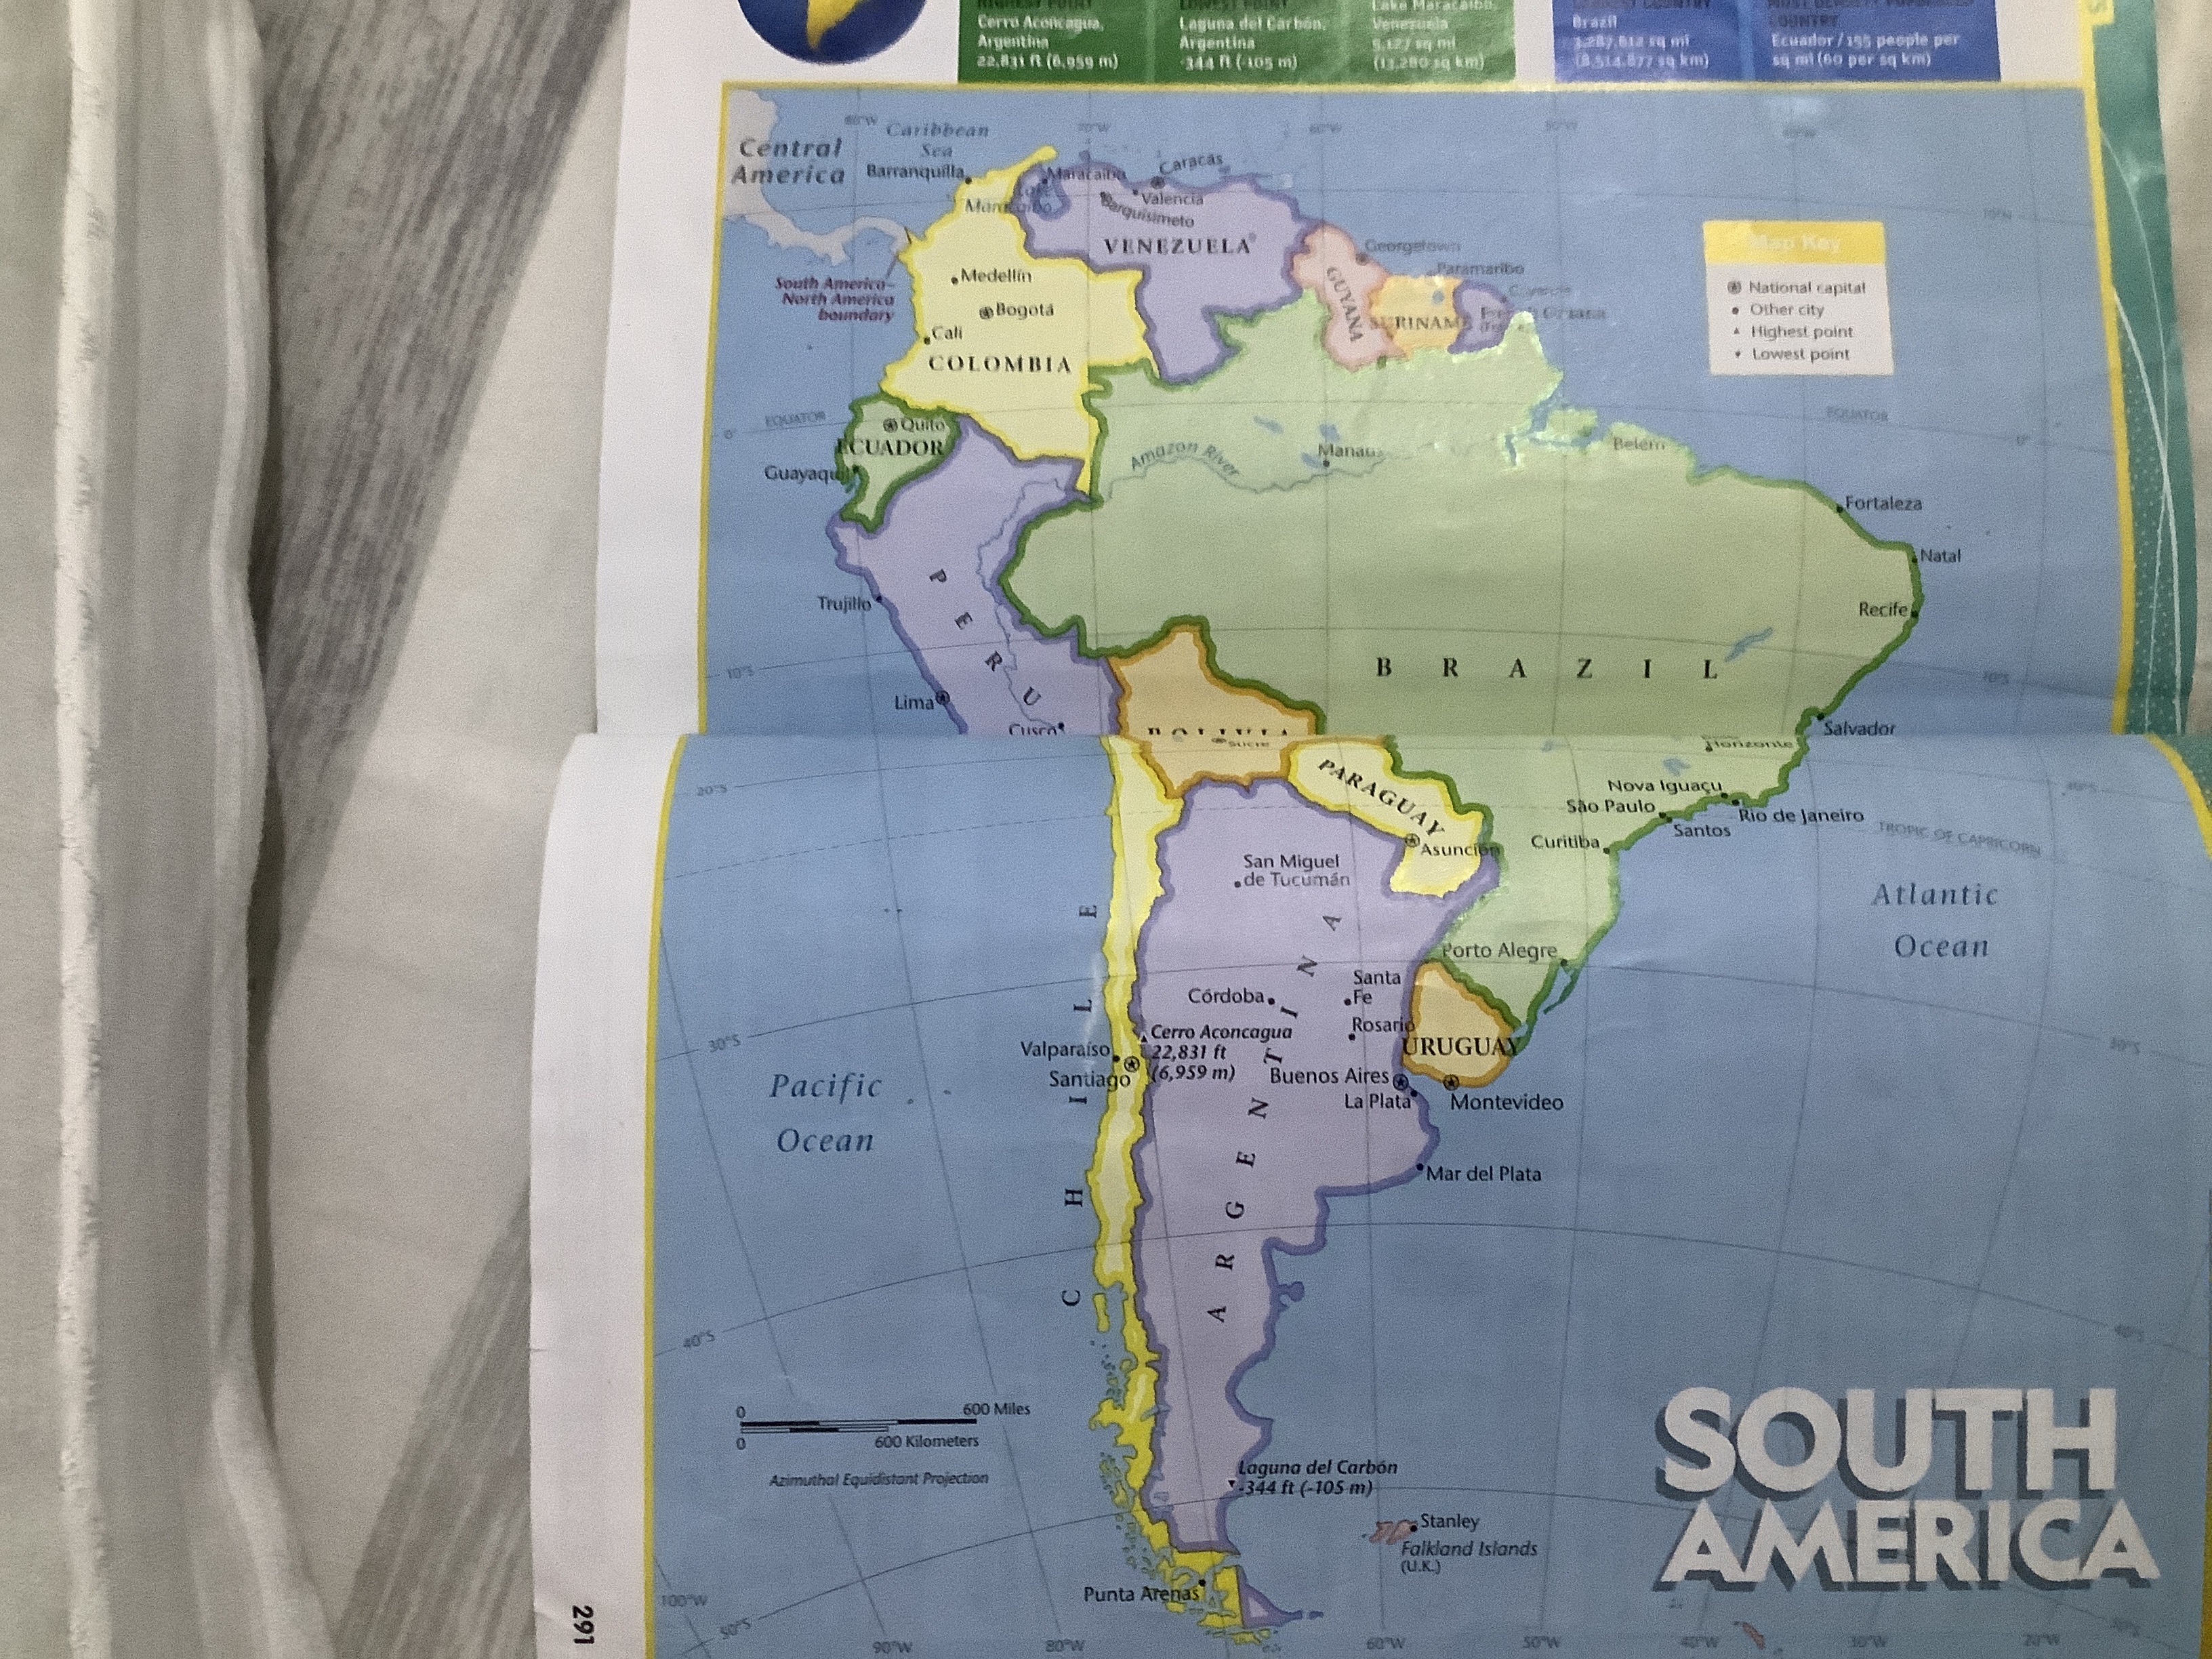 countries in south america - Year 1 - Quizizz